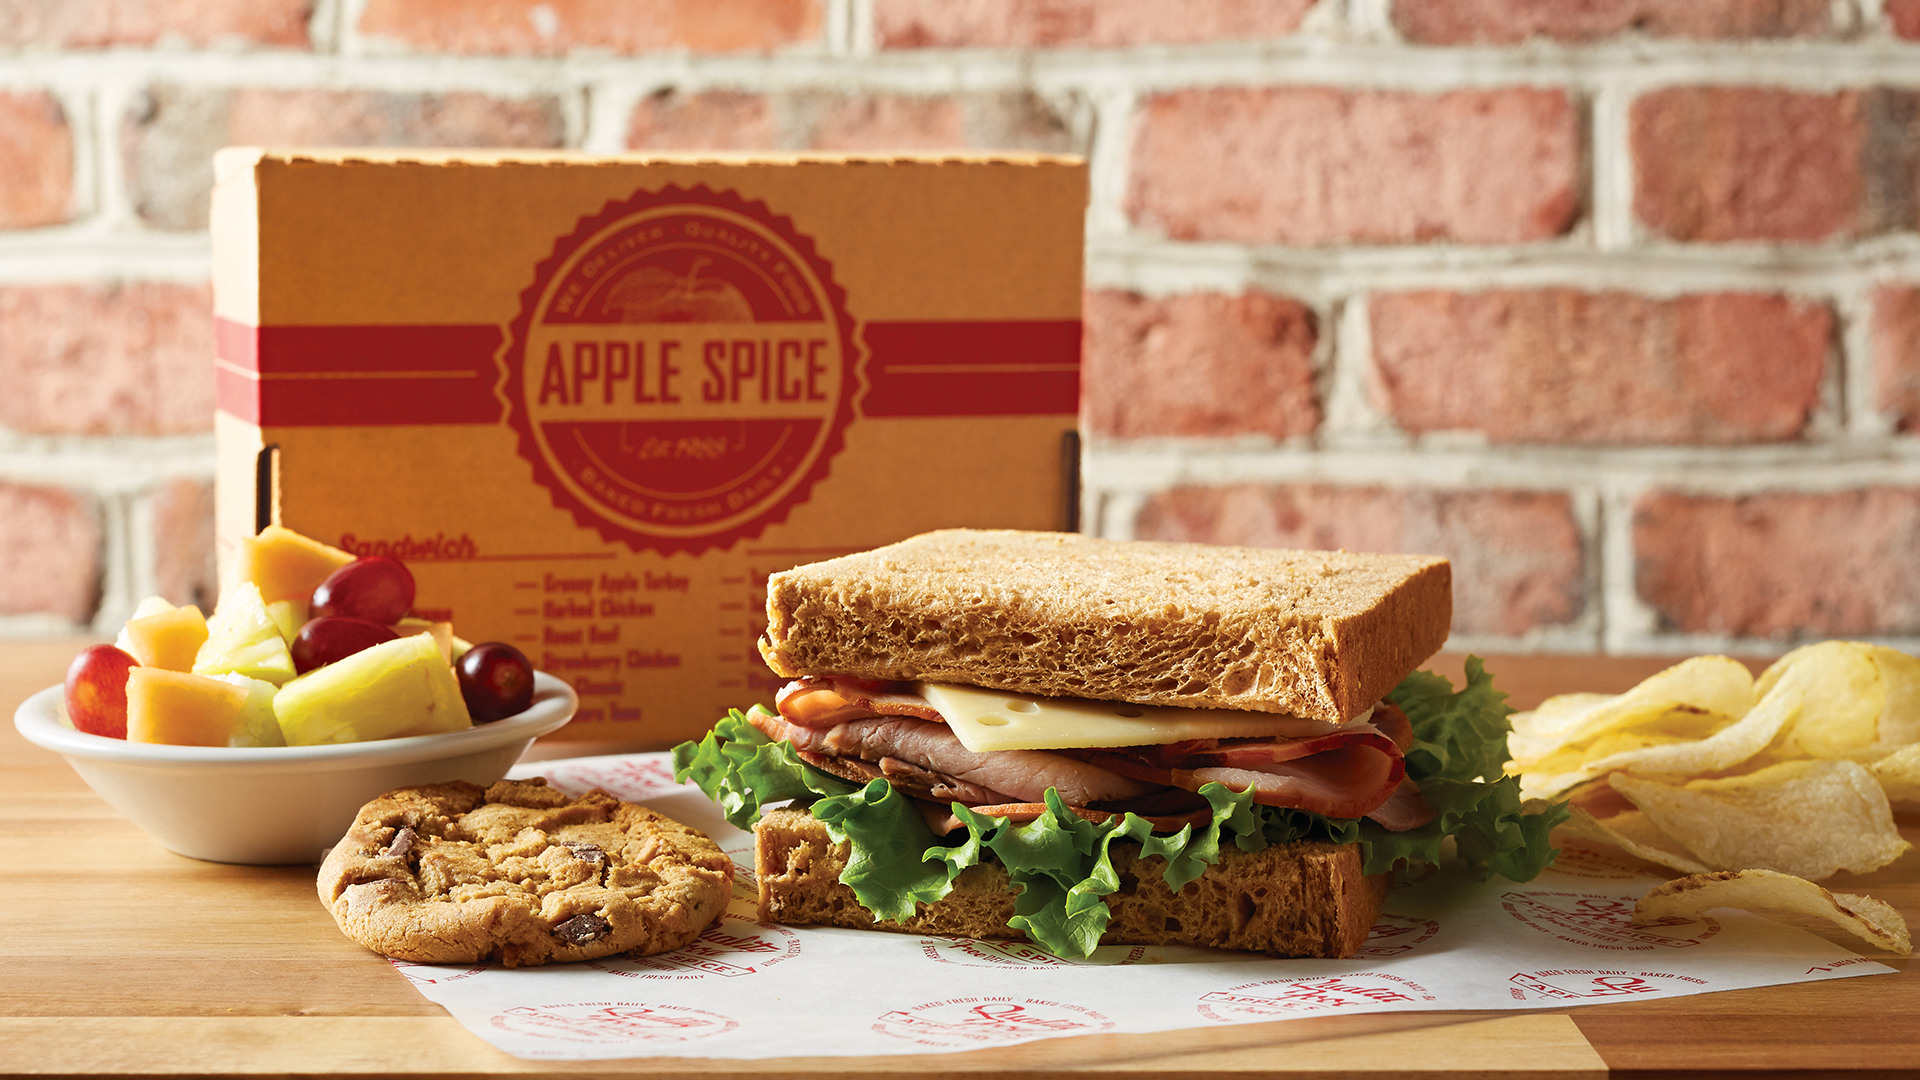 Apple Spice Boxed Lunch Unboxed